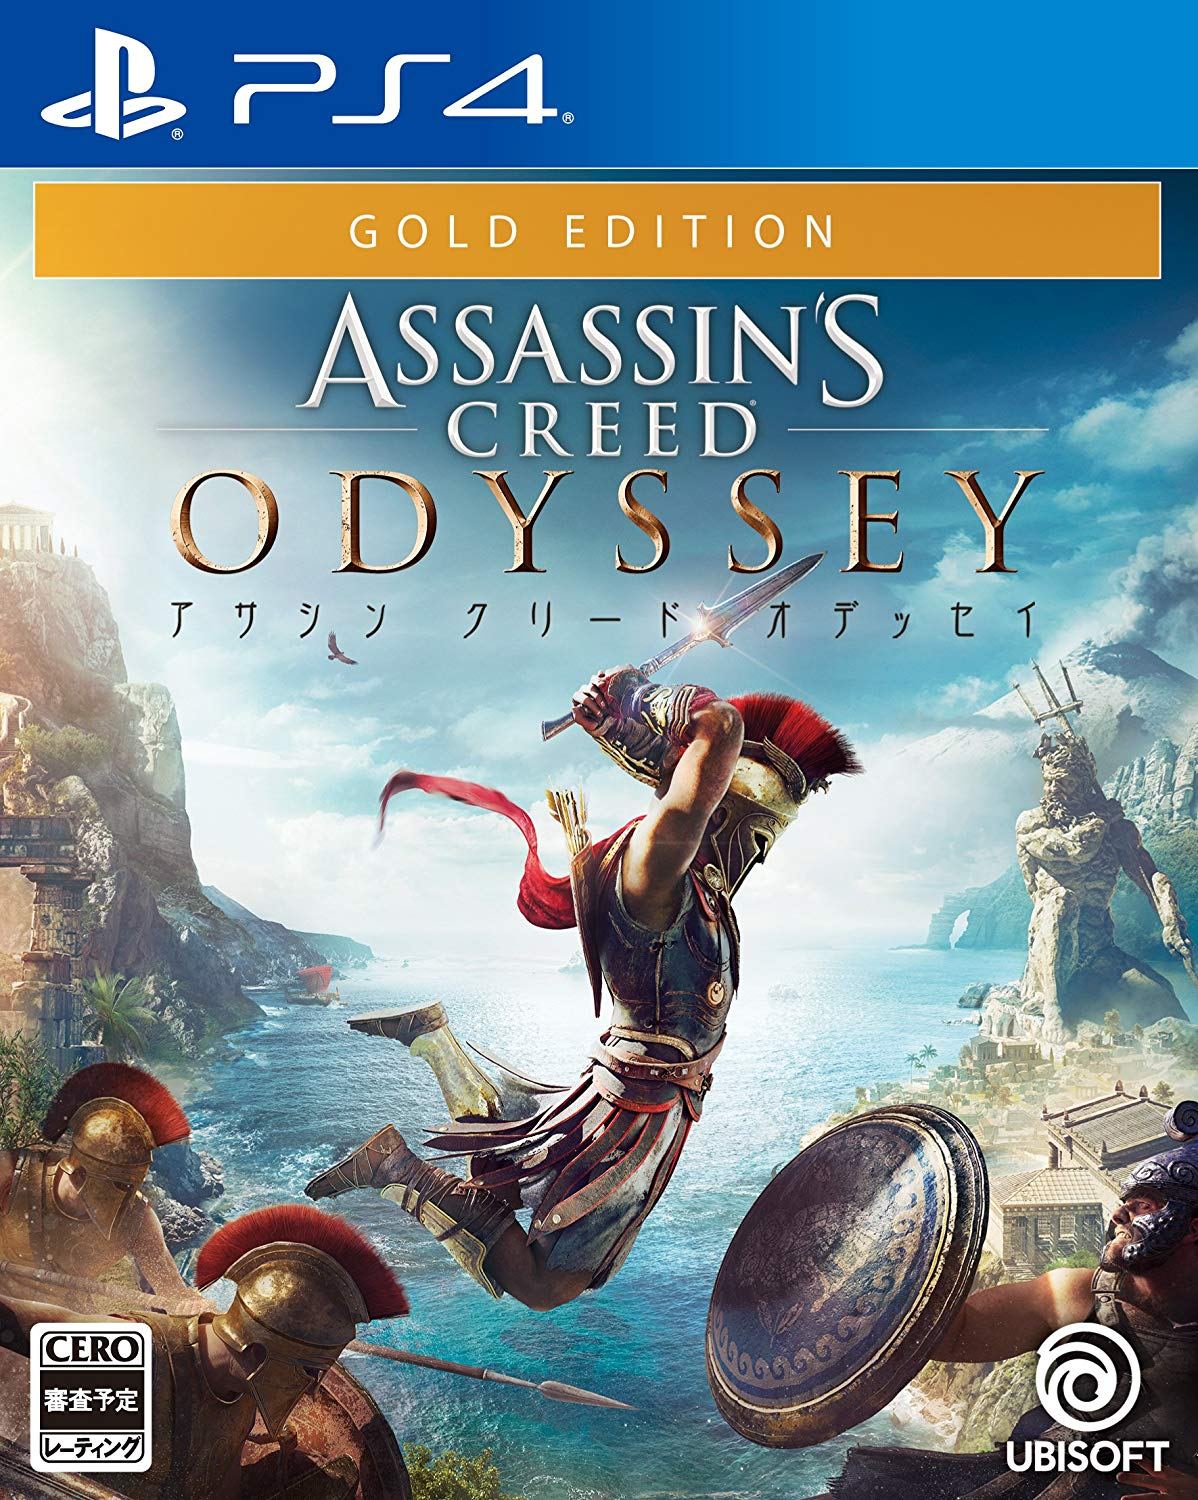 Assassin's Creed Odyssey ps4 диск. Assassin's Creed Odyssey Gold Edition ps4 диск. Assassins Одиссея ps4. Assassins Creed Odyssey Gold Edition Xbox one обложка. Assassin s creed odyssey editions